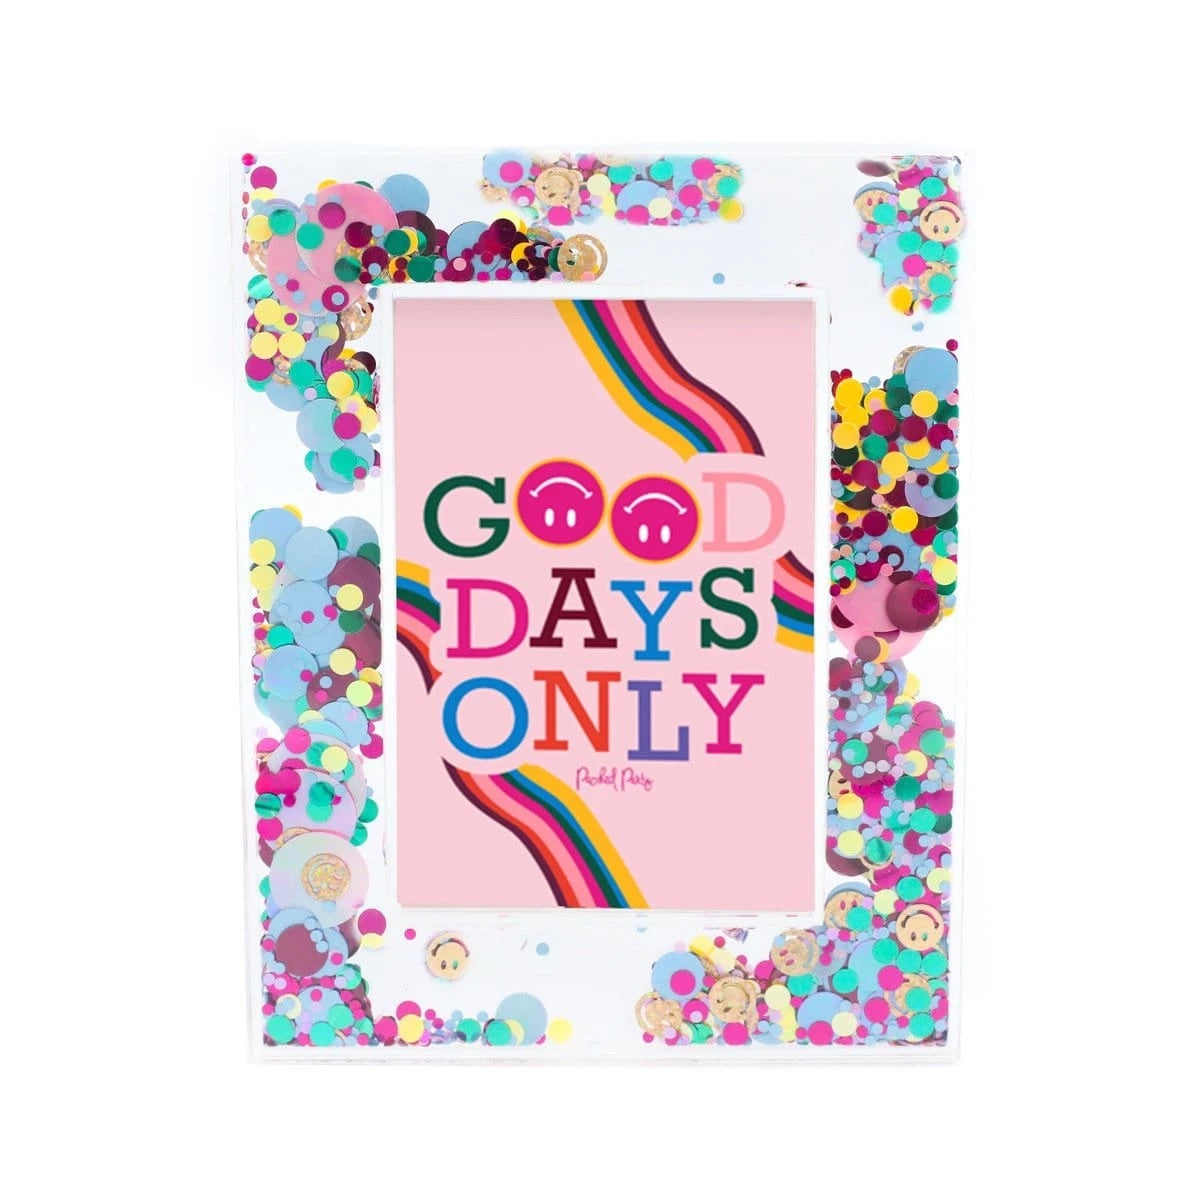 GOOD DAYS ONLY CONFETTI FRAME